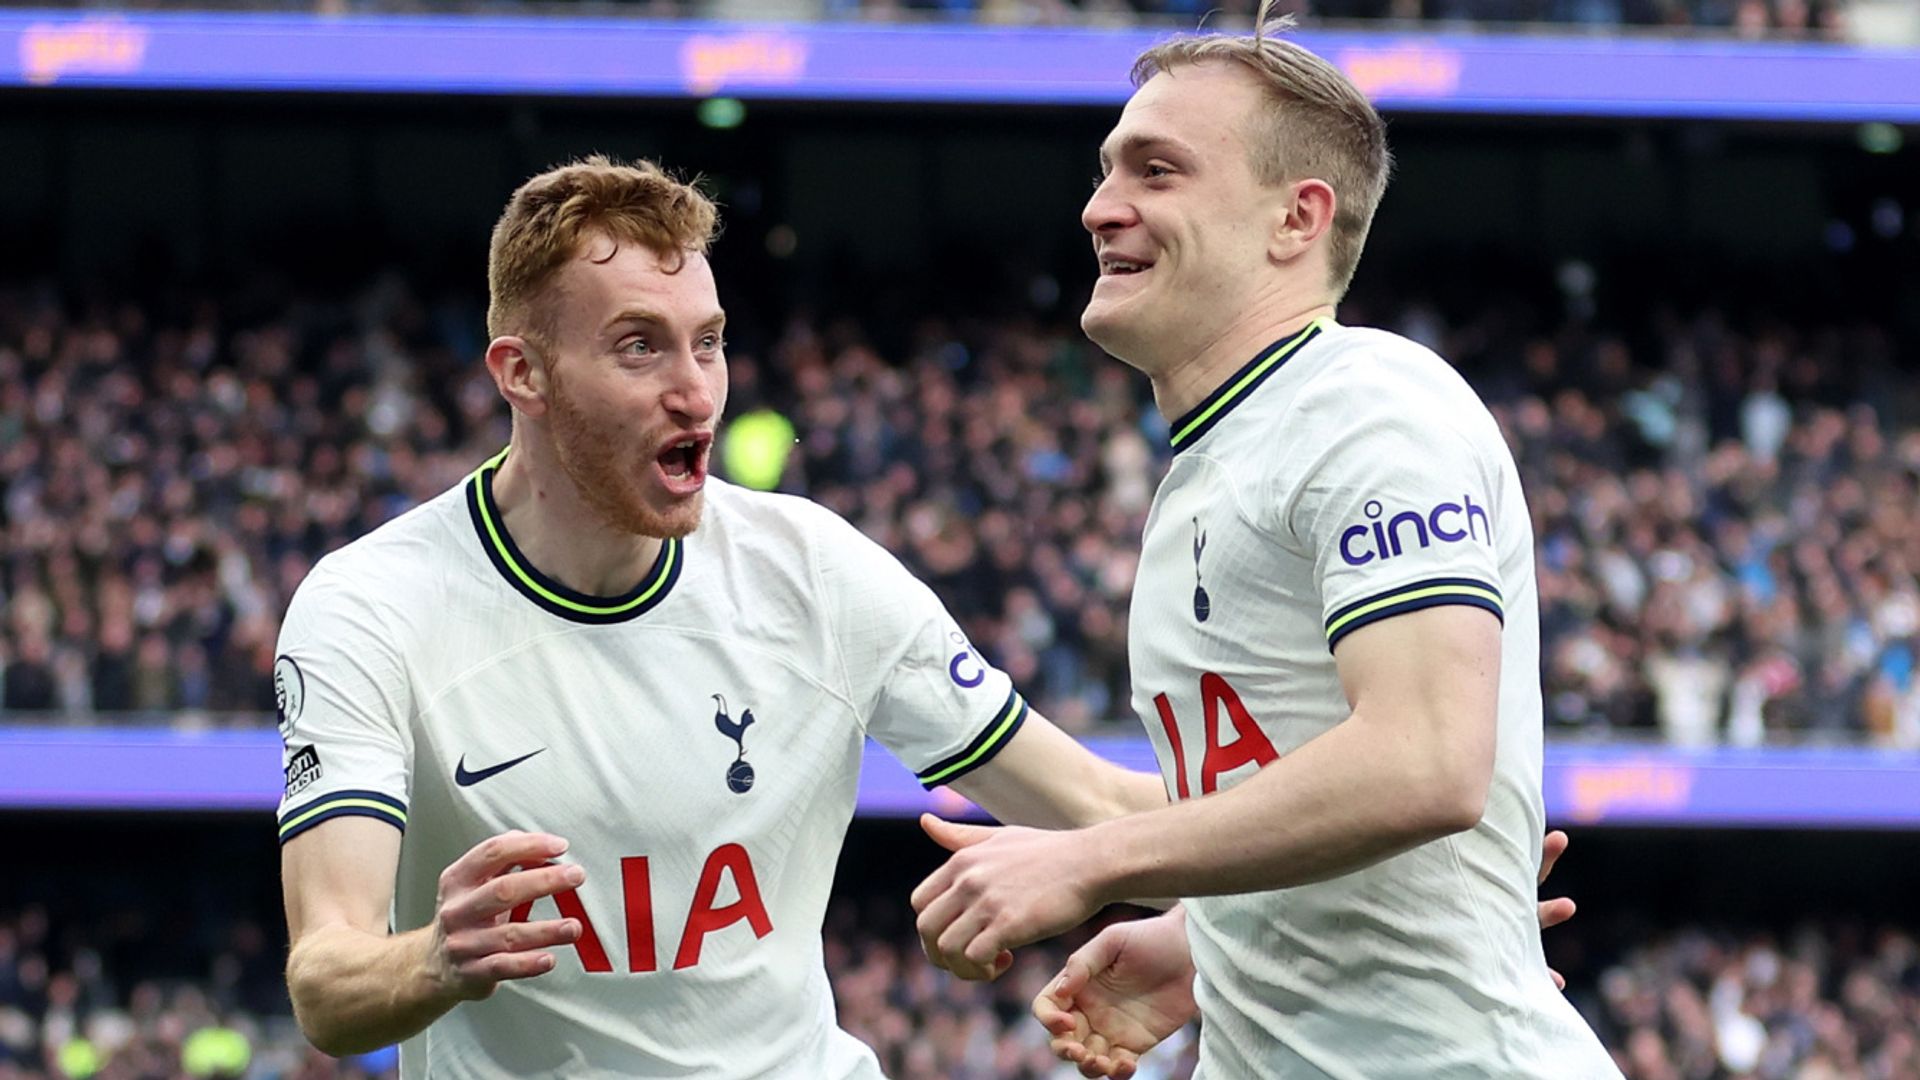 Skipp stunner helps Spurs cruise to win over Chelsea as Potter's woes continue